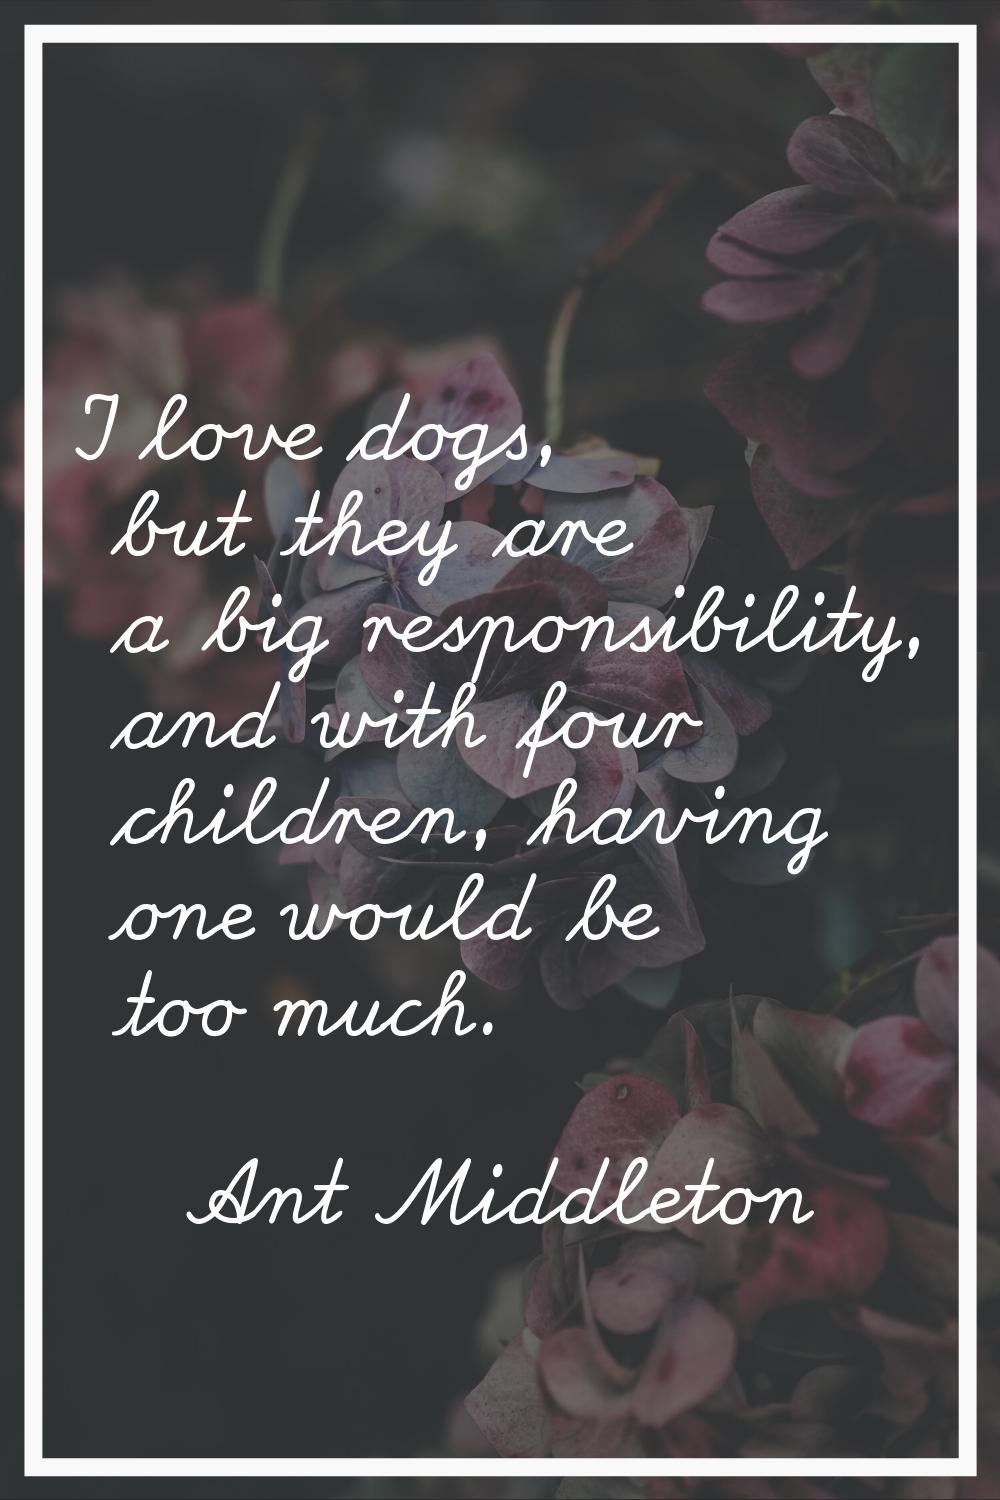 I love dogs, but they are a big responsibility, and with four children, having one would be too muc